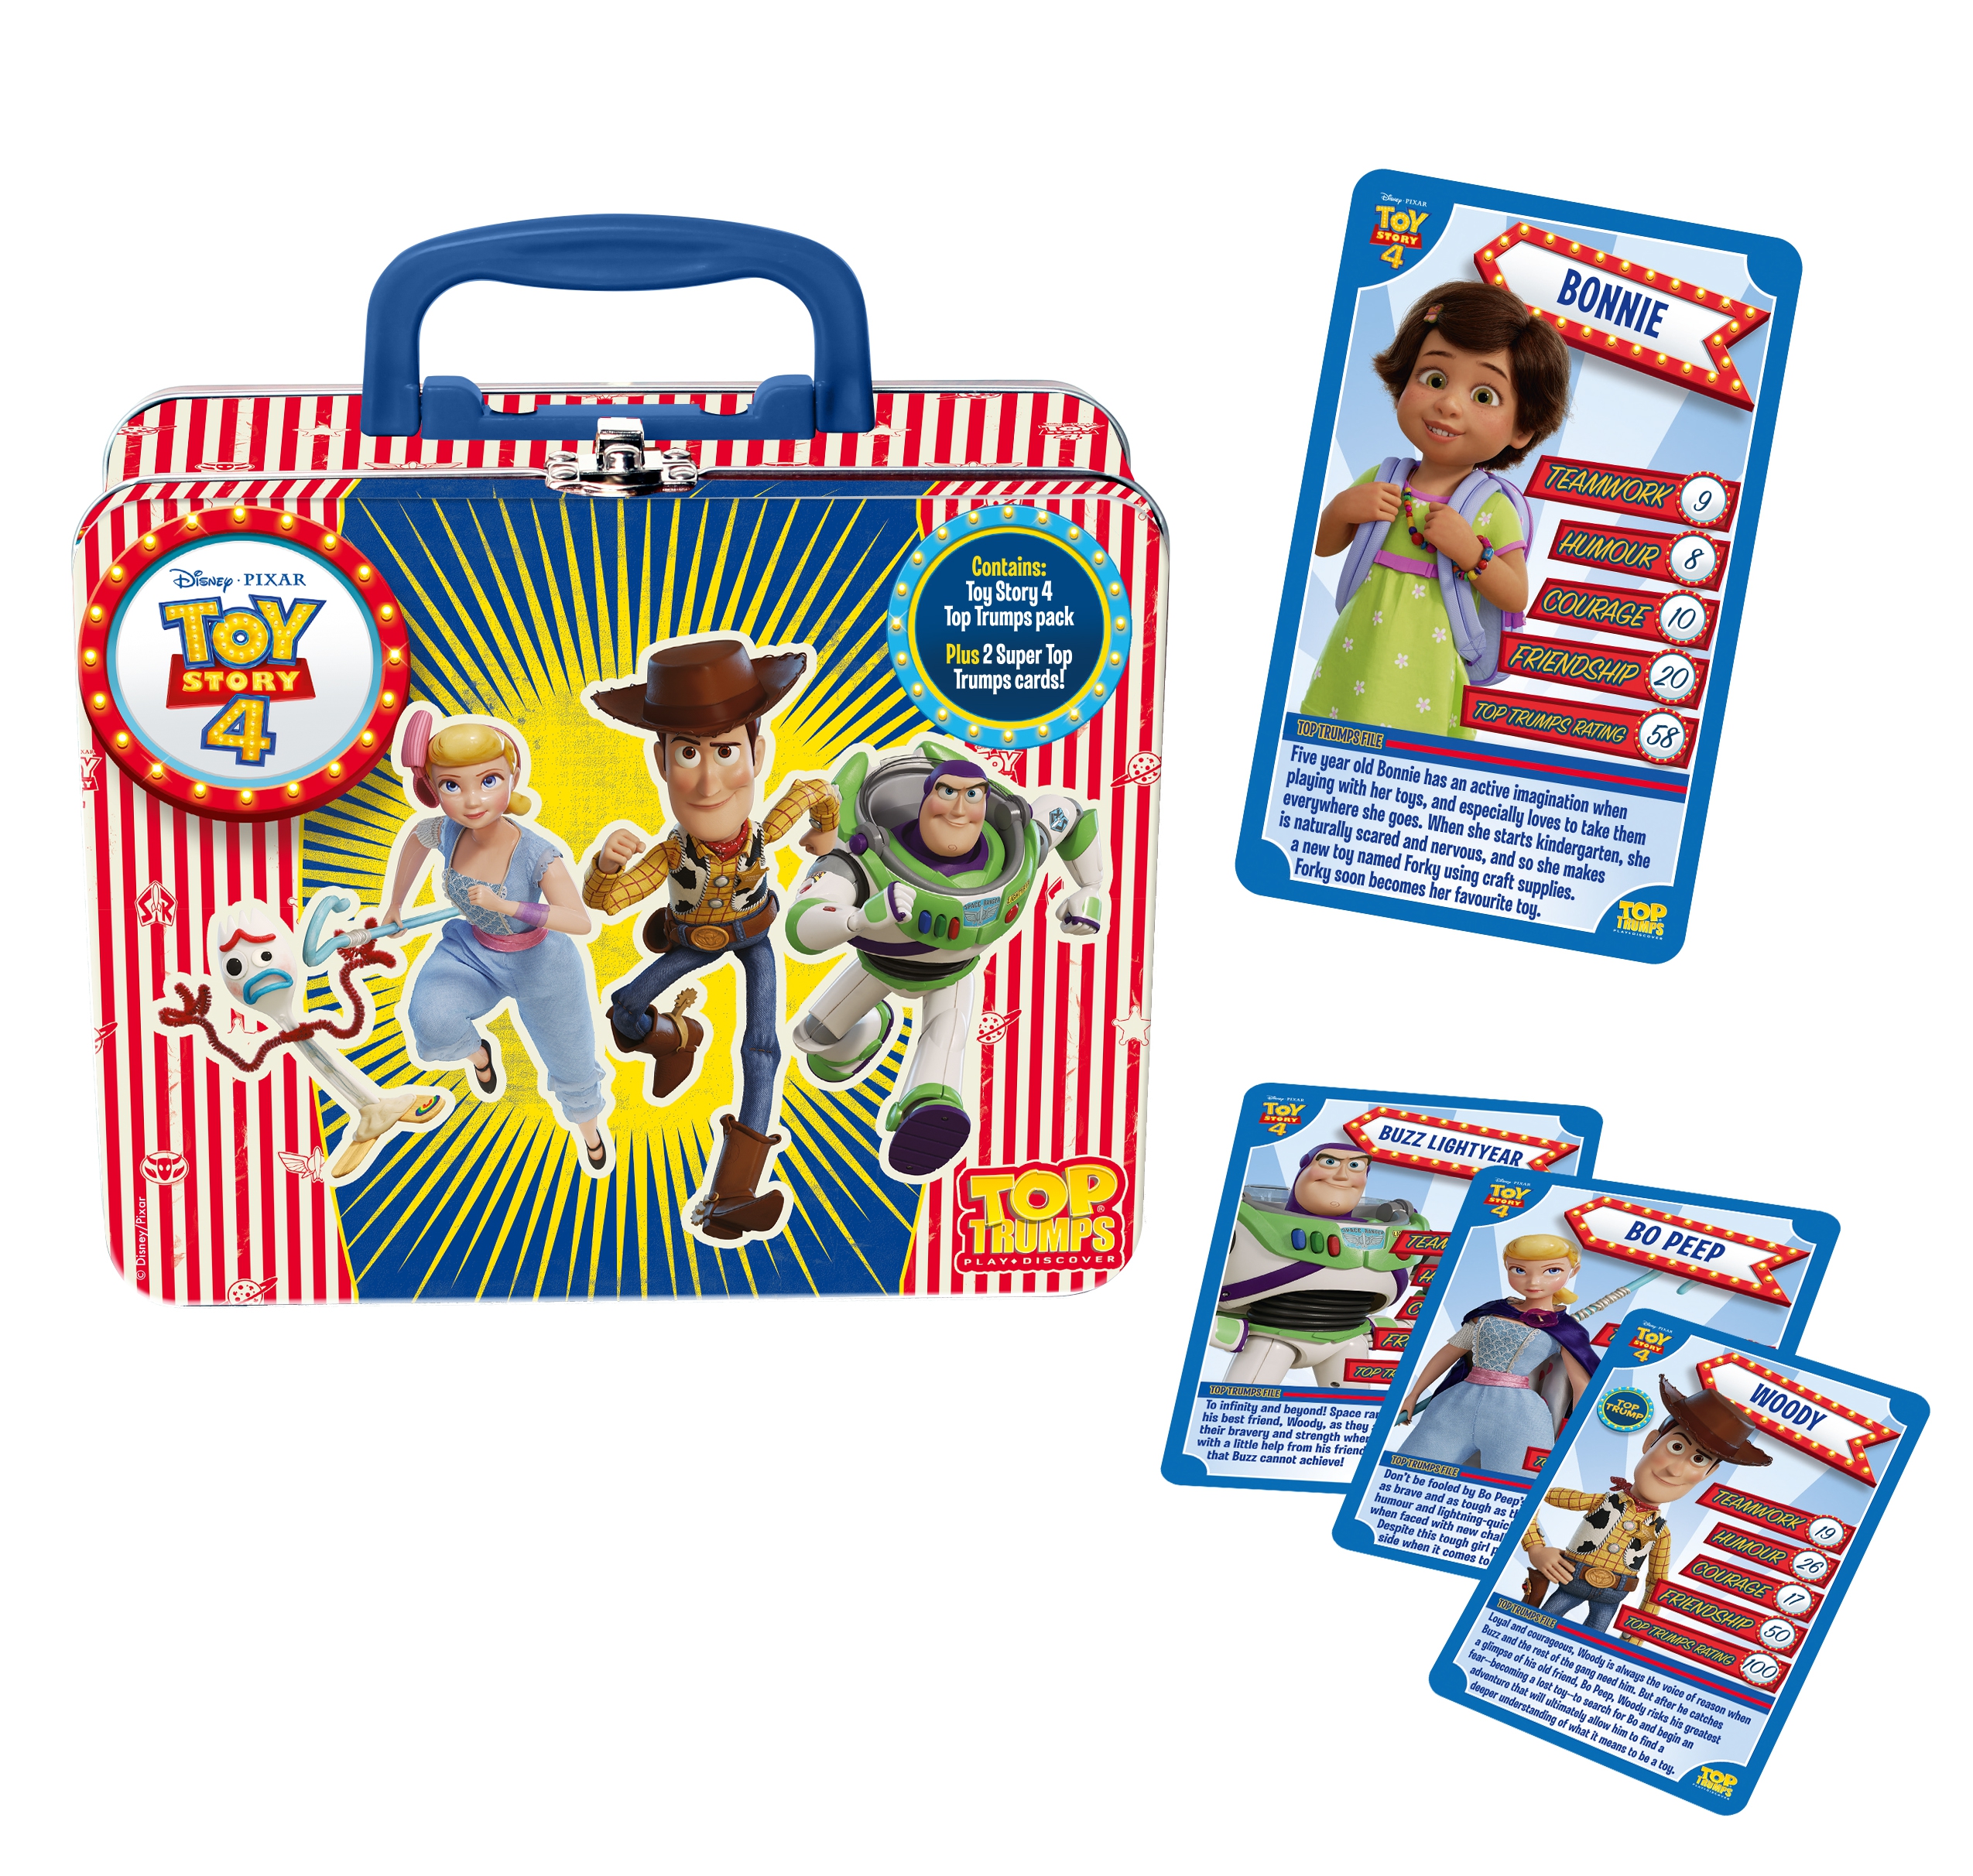 Disney Toy Story 4 Tin Collectors Card Game